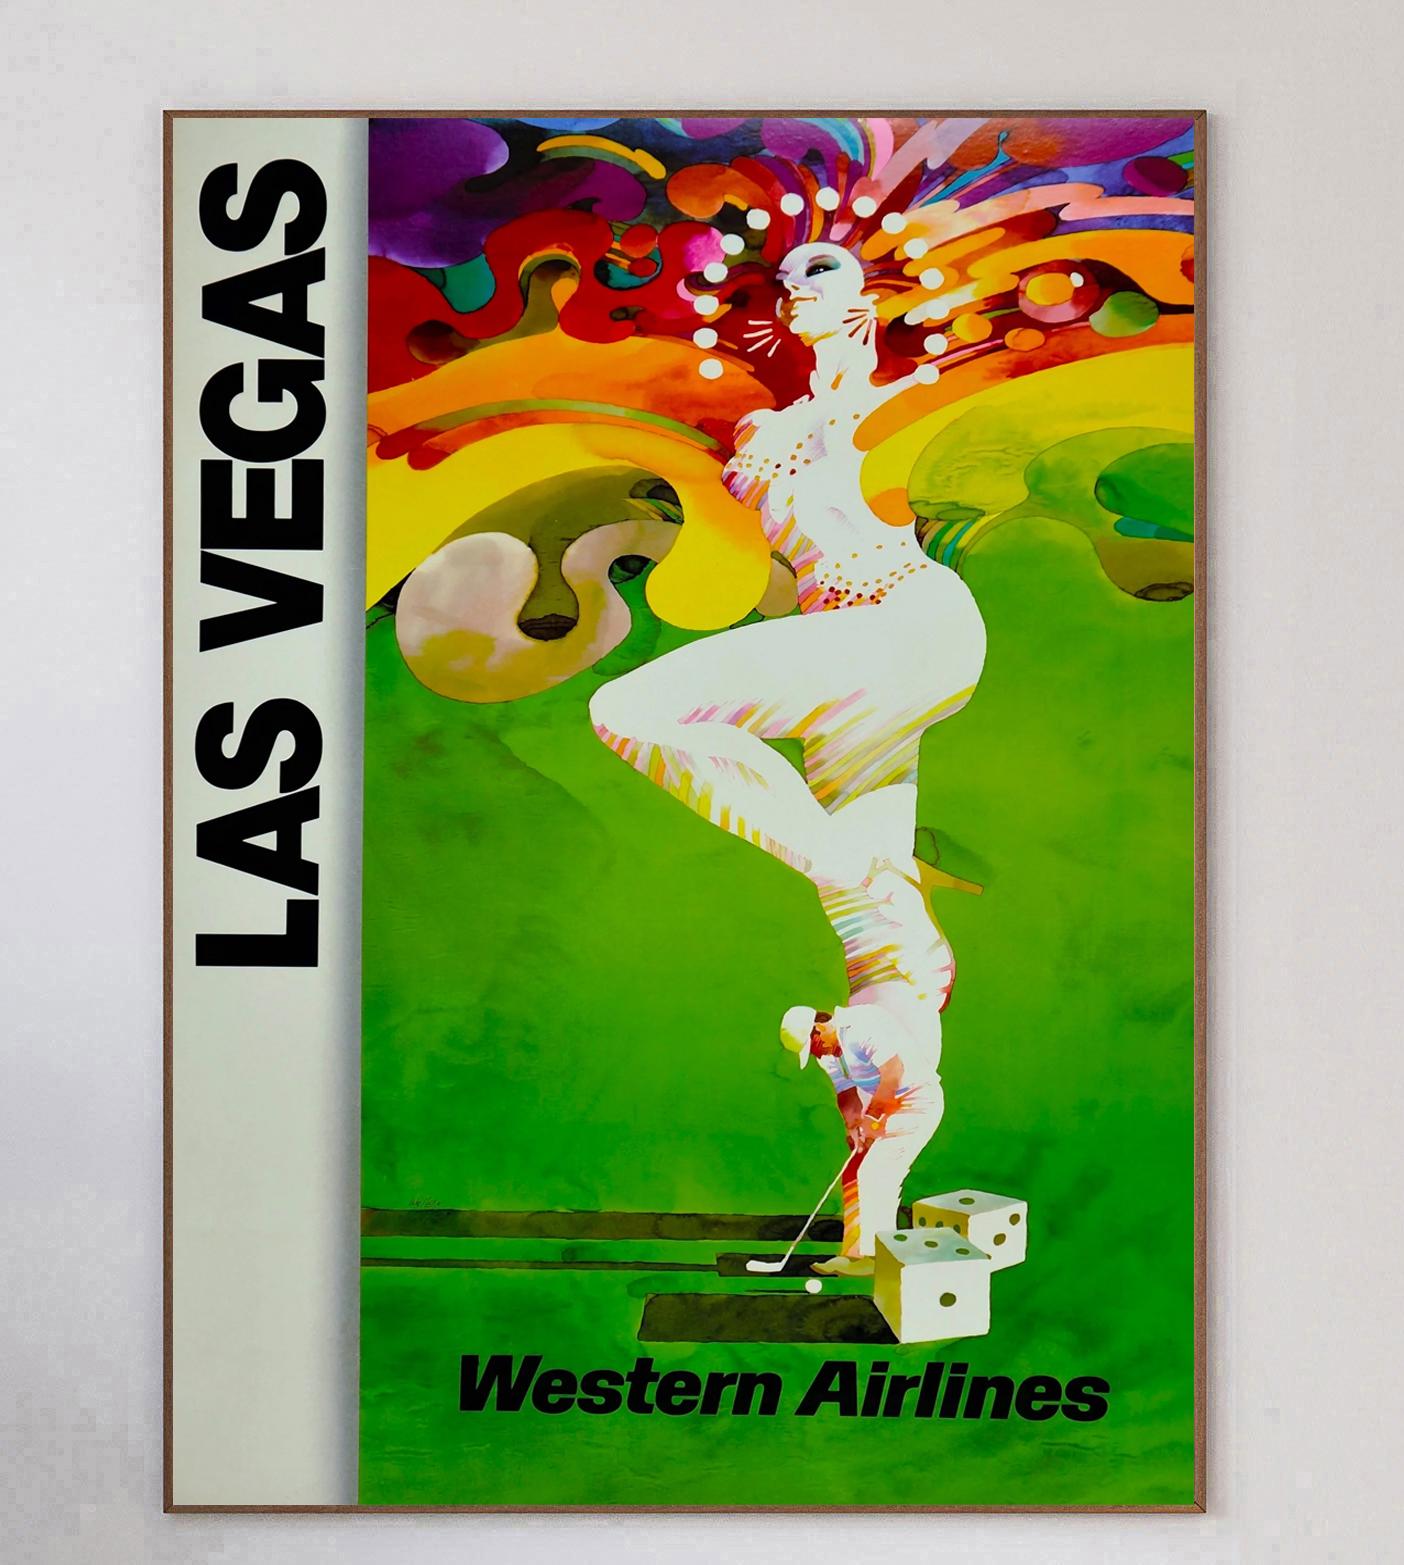 This beautiful and vibrant piece was created in 1980 to advertise Western Airlines routes to Las Vegas. Featuring wonderful artwork depicting the contrasts of Vegas, from amazing shows, to the casino, to golf. 

Western Airlines was a major U.S